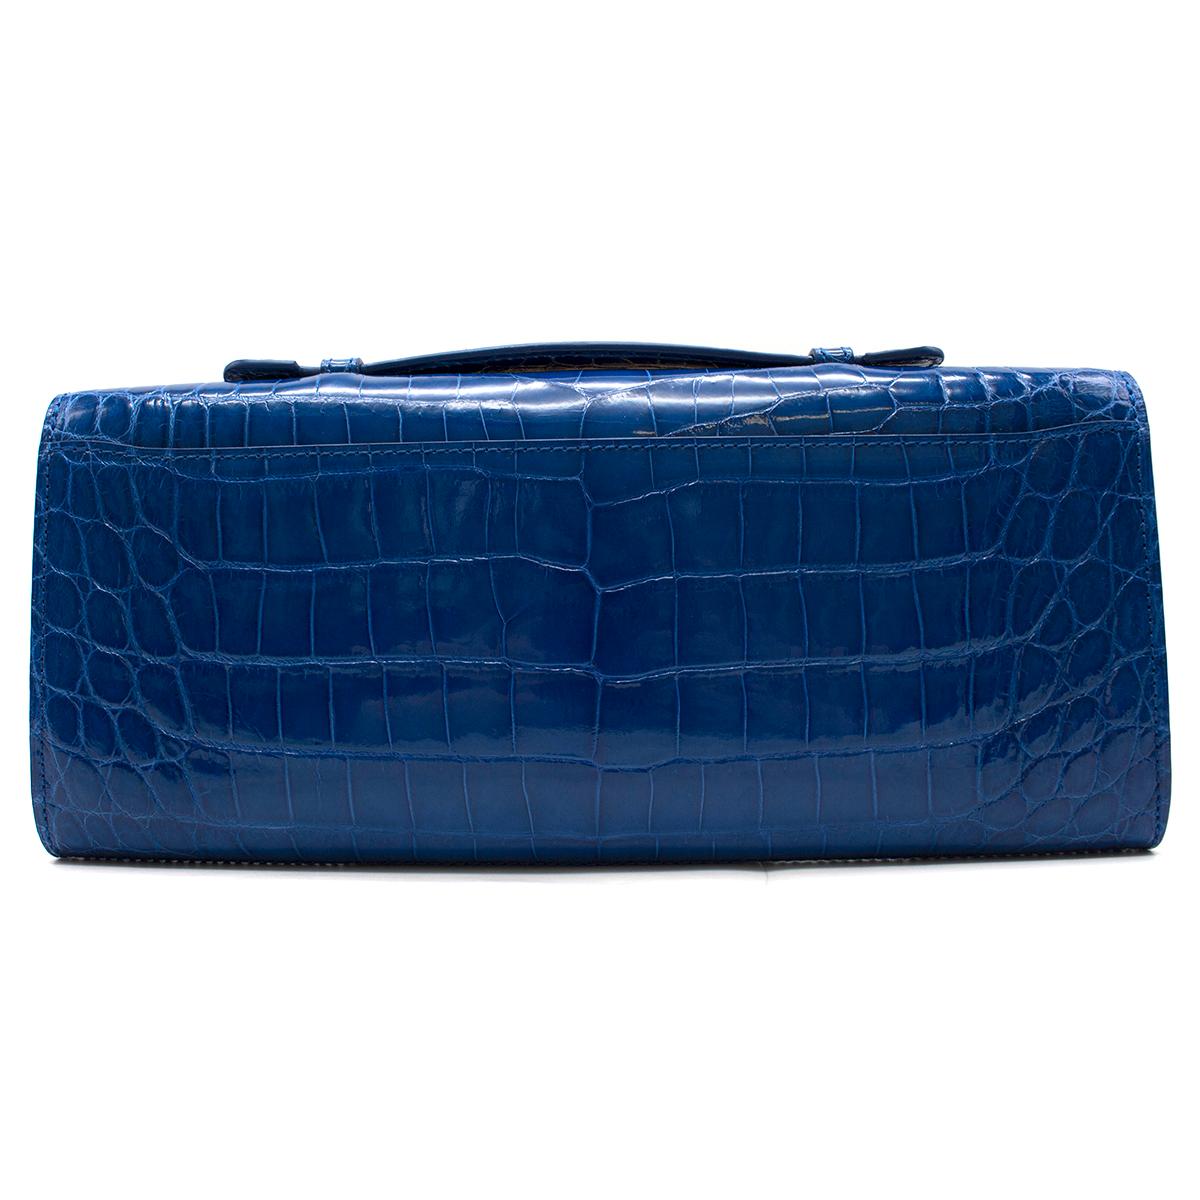 Kwanpen Tanzanite Croc Leather Raffles 1819 Clutch

- Current from The Raffles Collection 
- Structured lines with iconic Raffles hardware, gold toned 
- Carried by top handle or shoulder chain strap.
- Internal features: 1 Large Compartment; 1